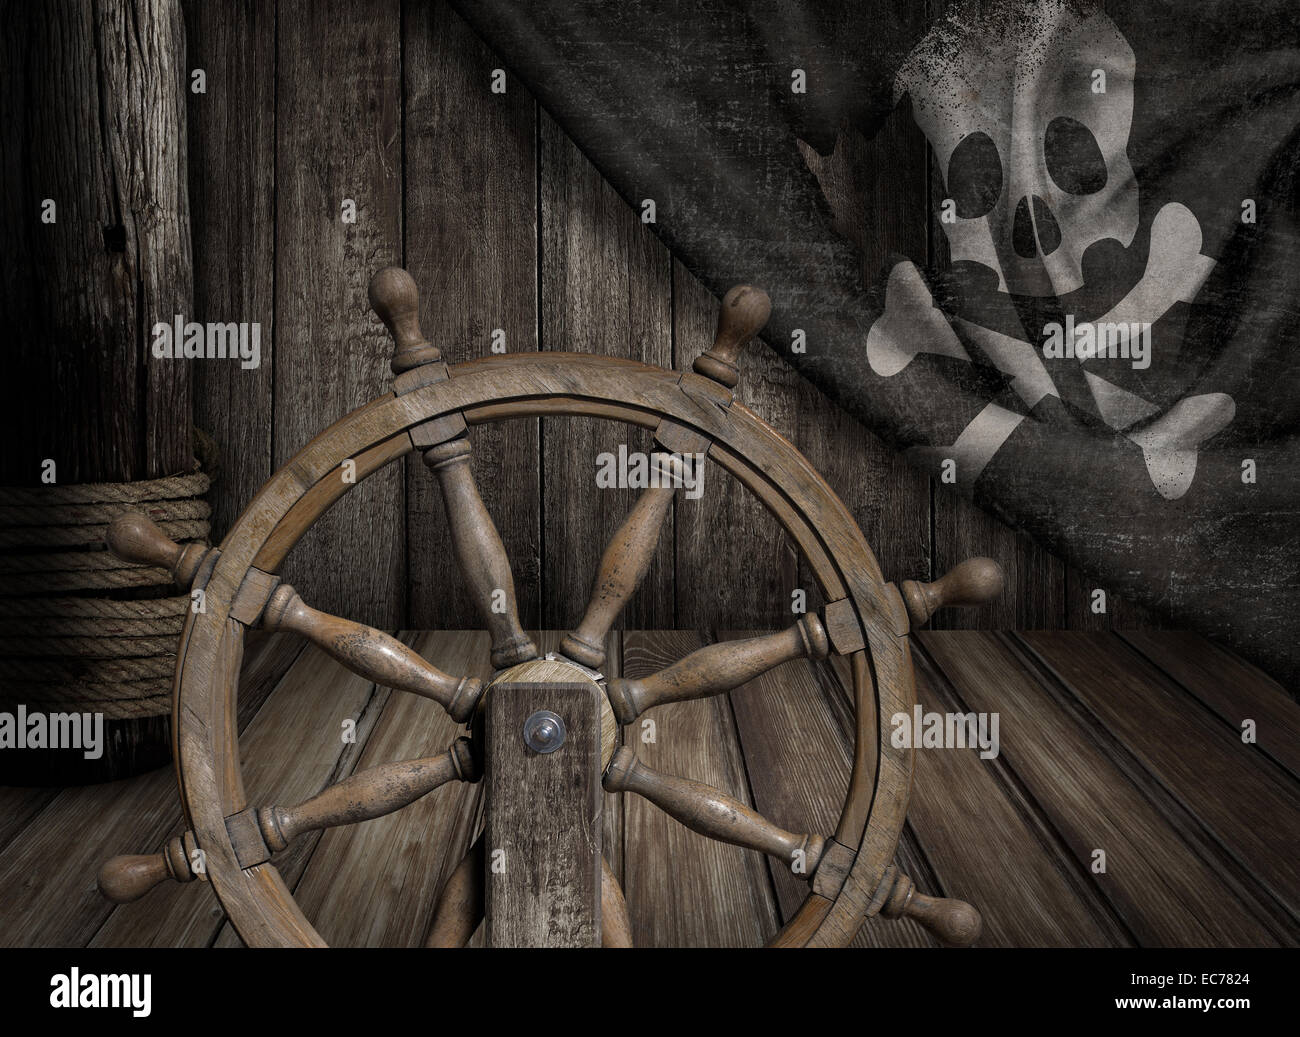 Pirates ship steering wheel with old jolly roger flag Stock Photo